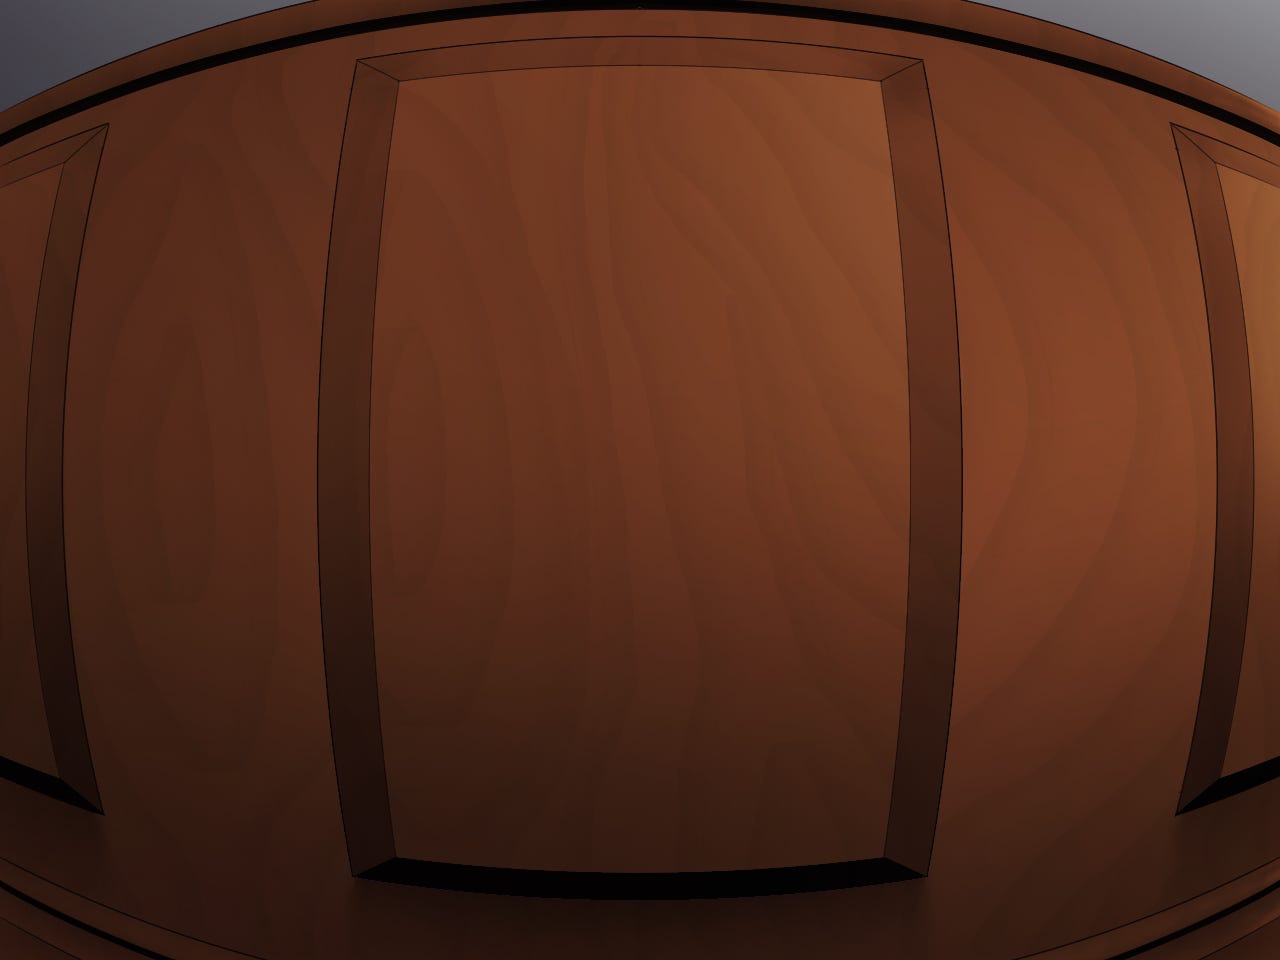 completed cg of wooden baseboards with a fish eye lens